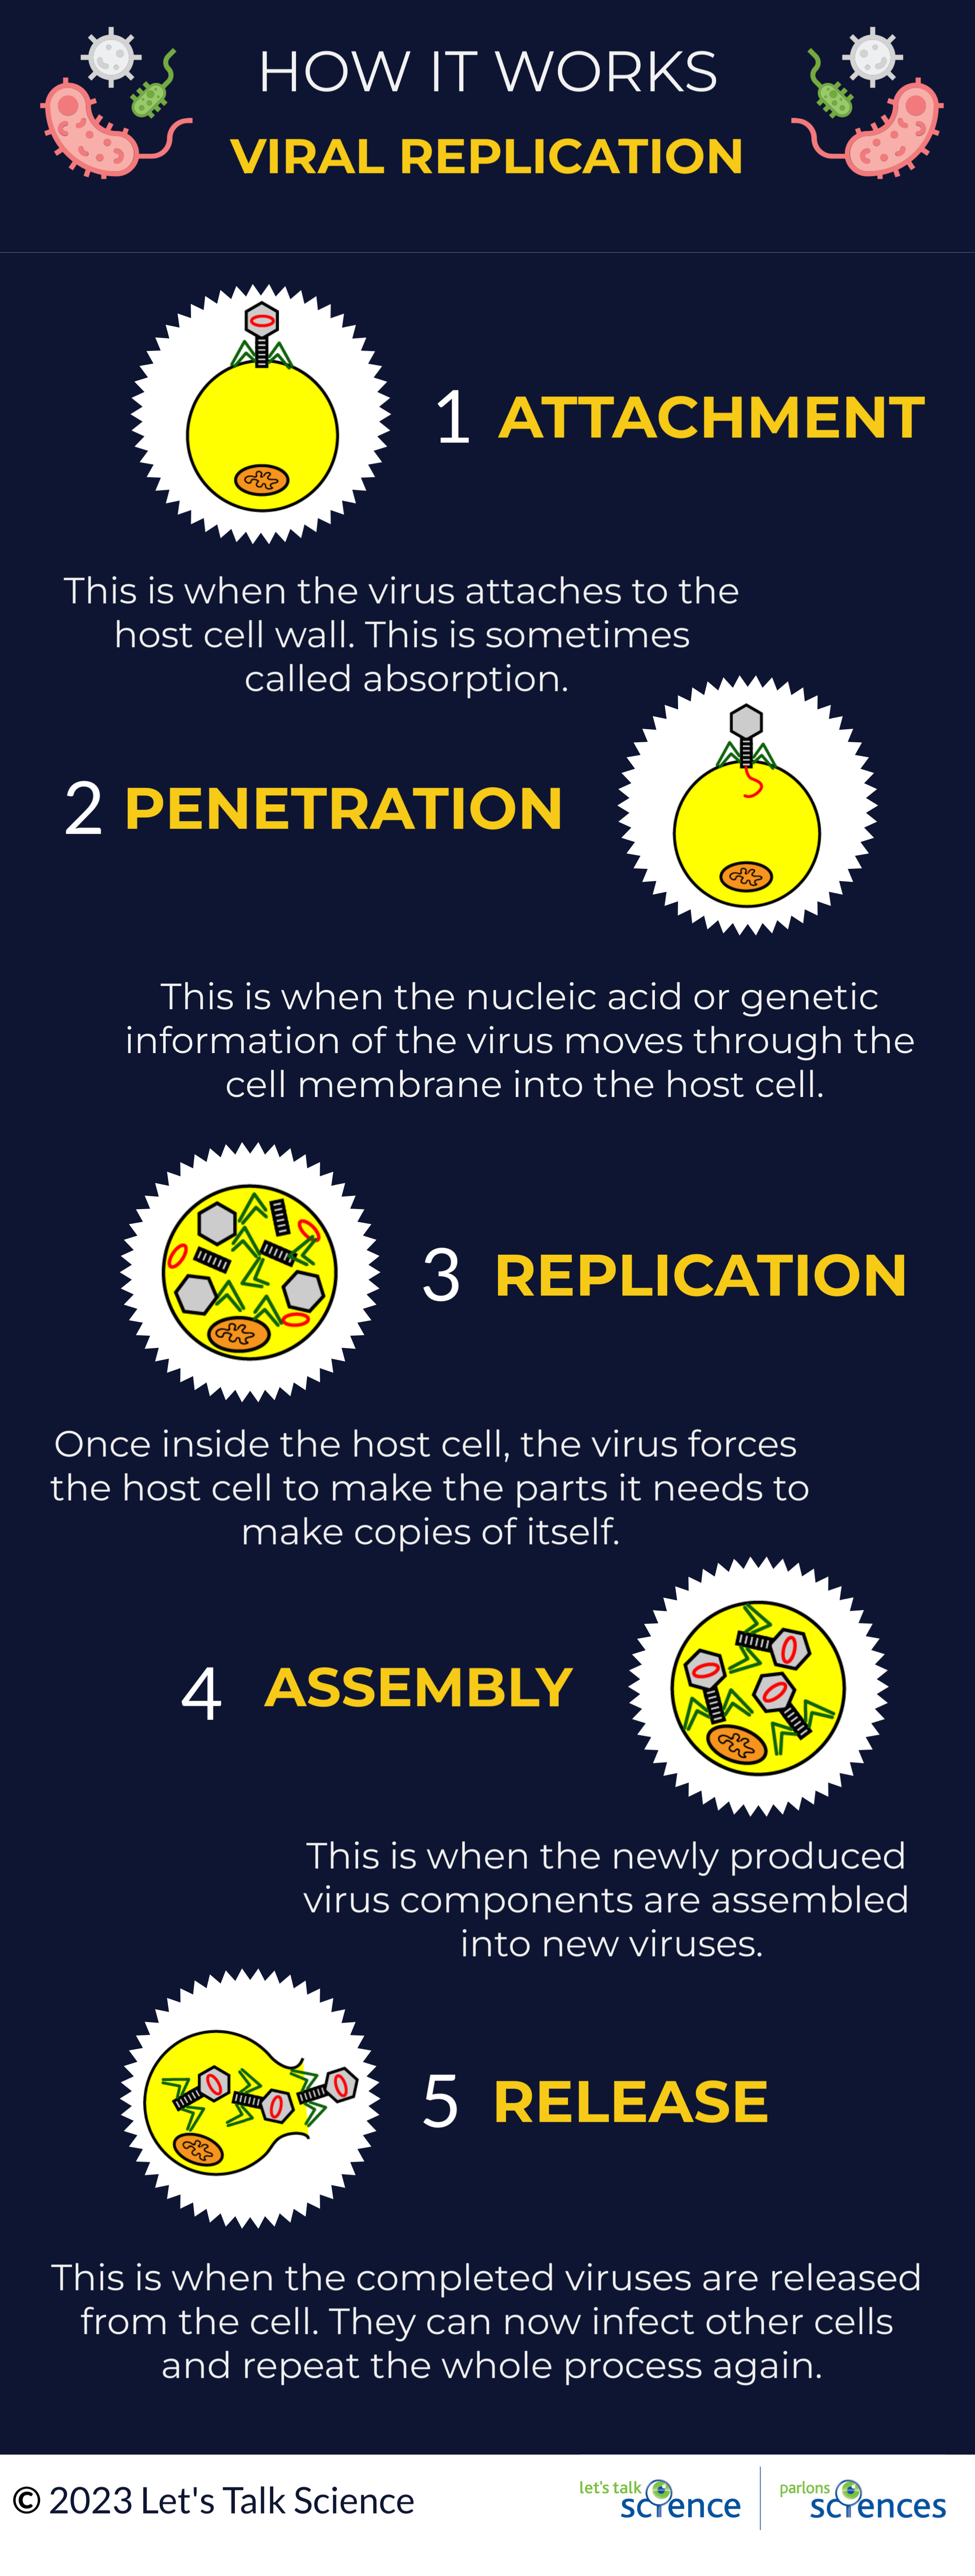 Introduction to Viruses